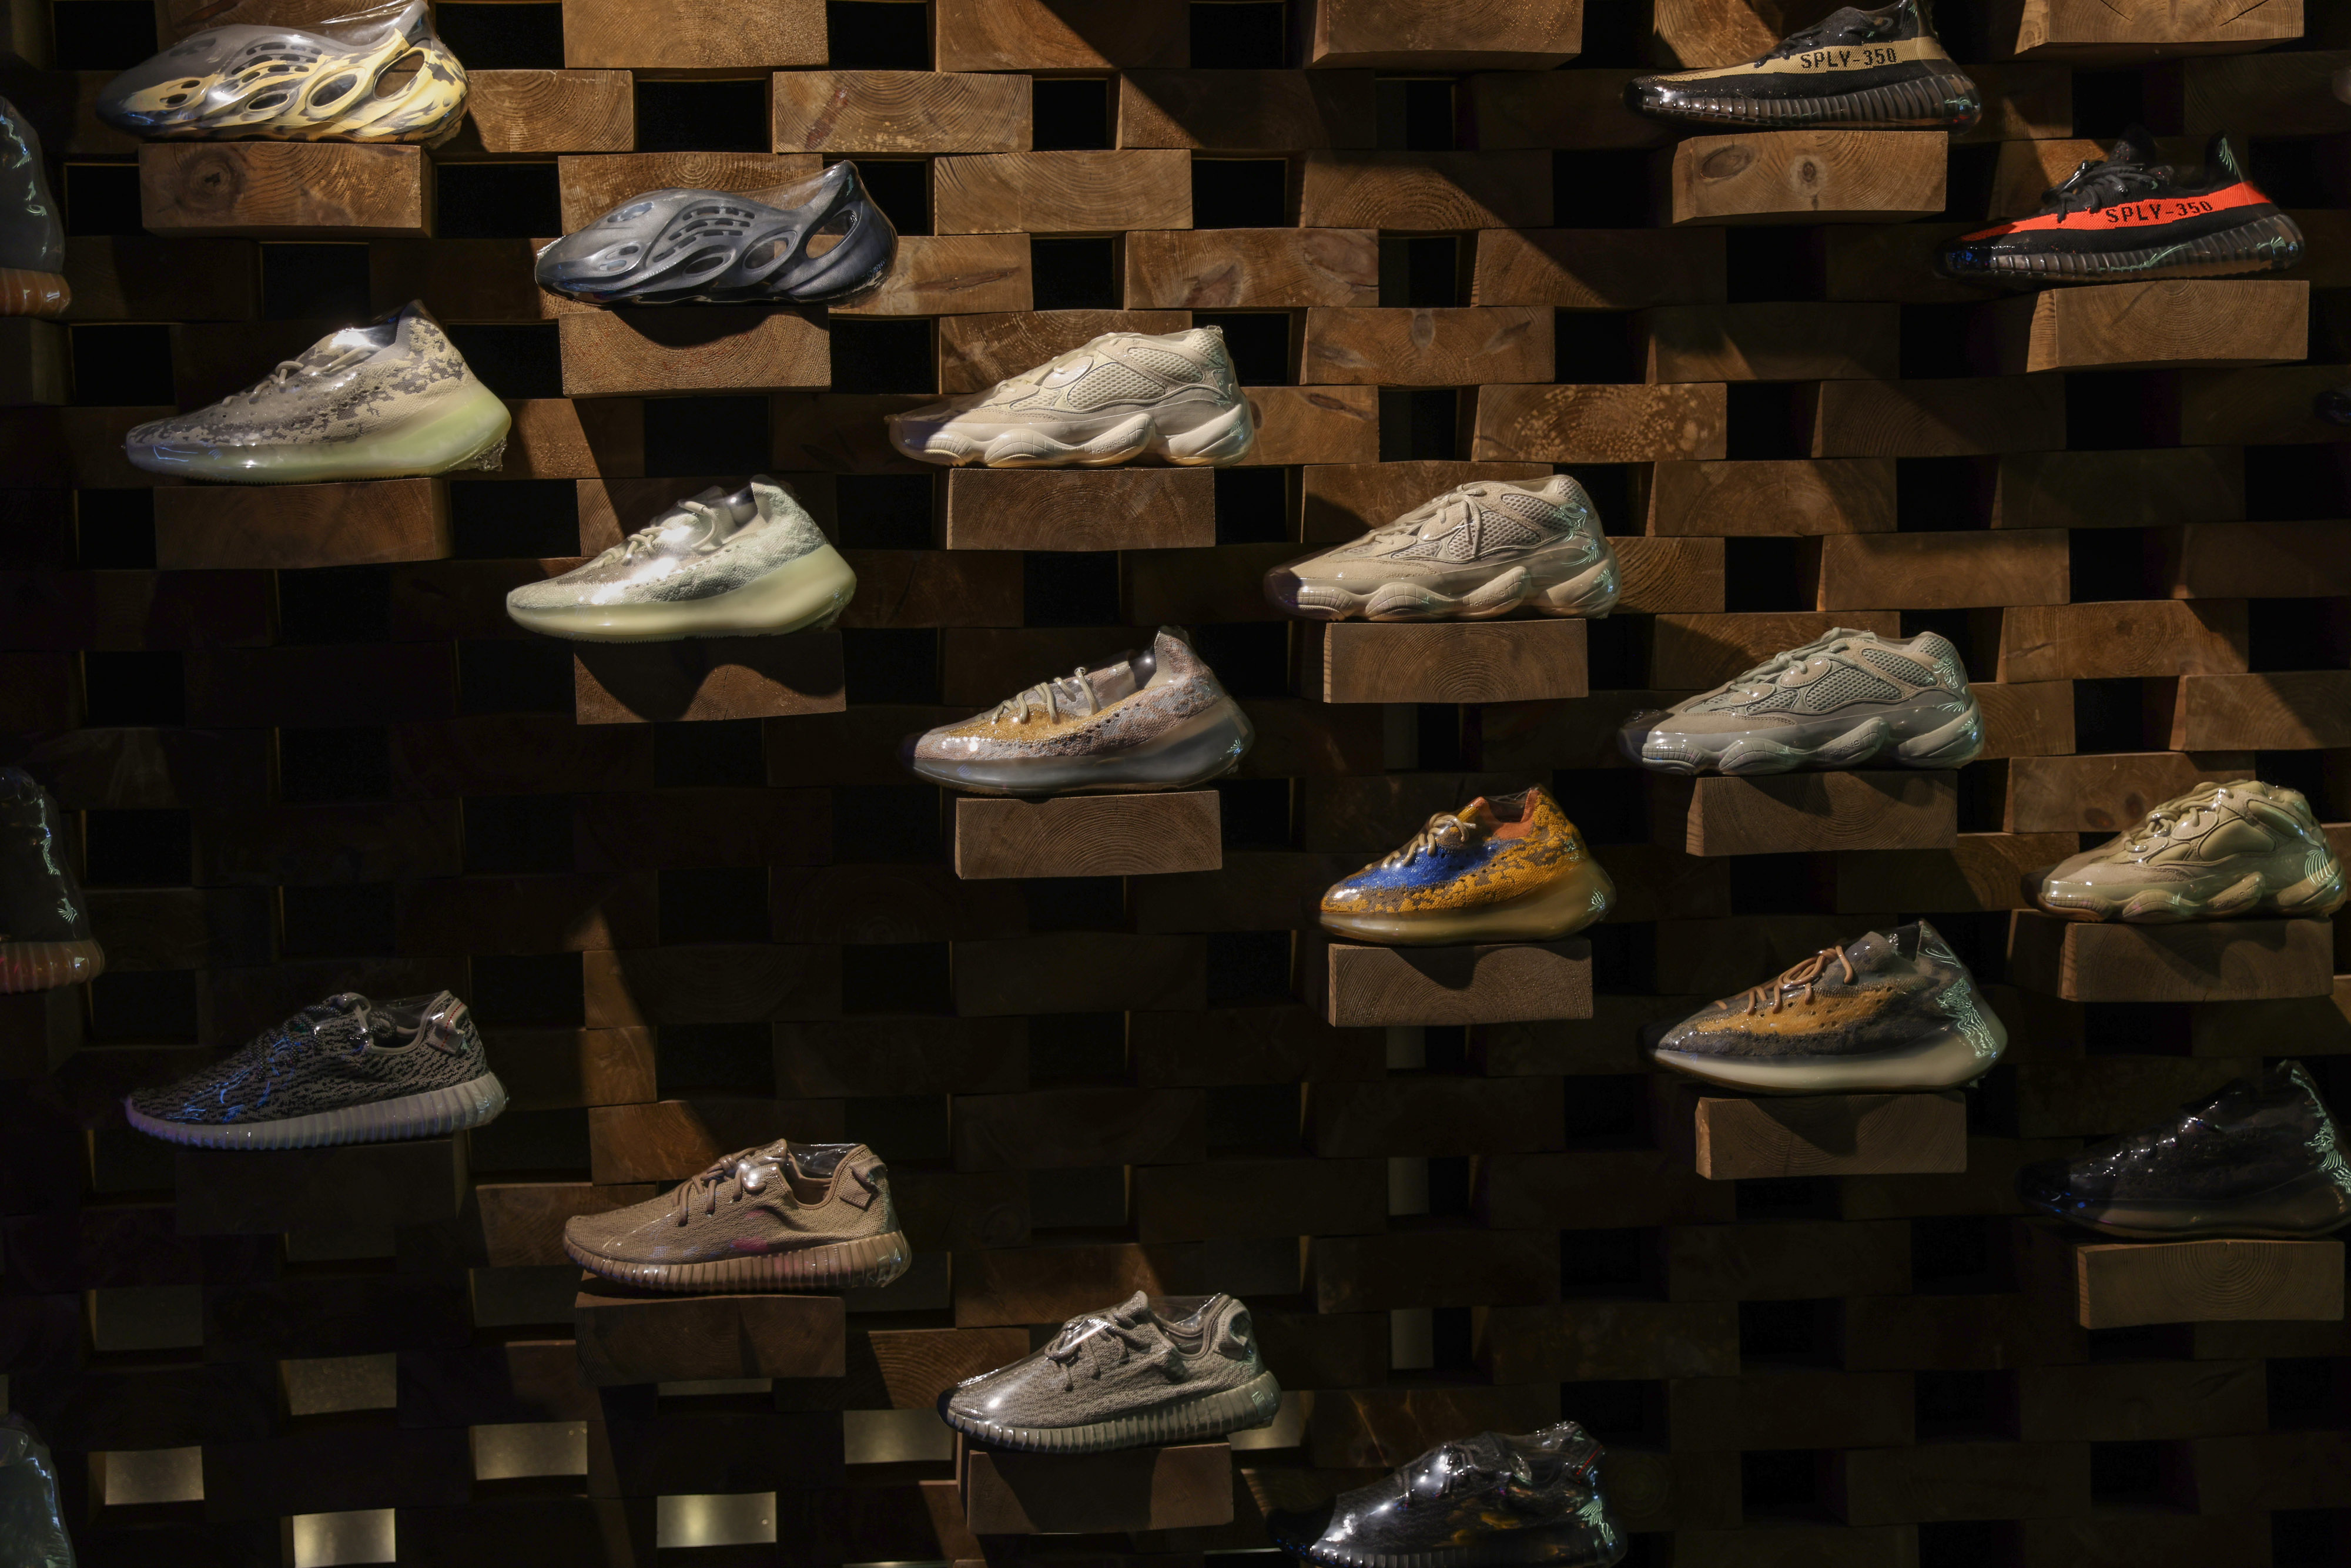 Adidas Sale Next Week Planned With Wholesale Partners - Bloomberg